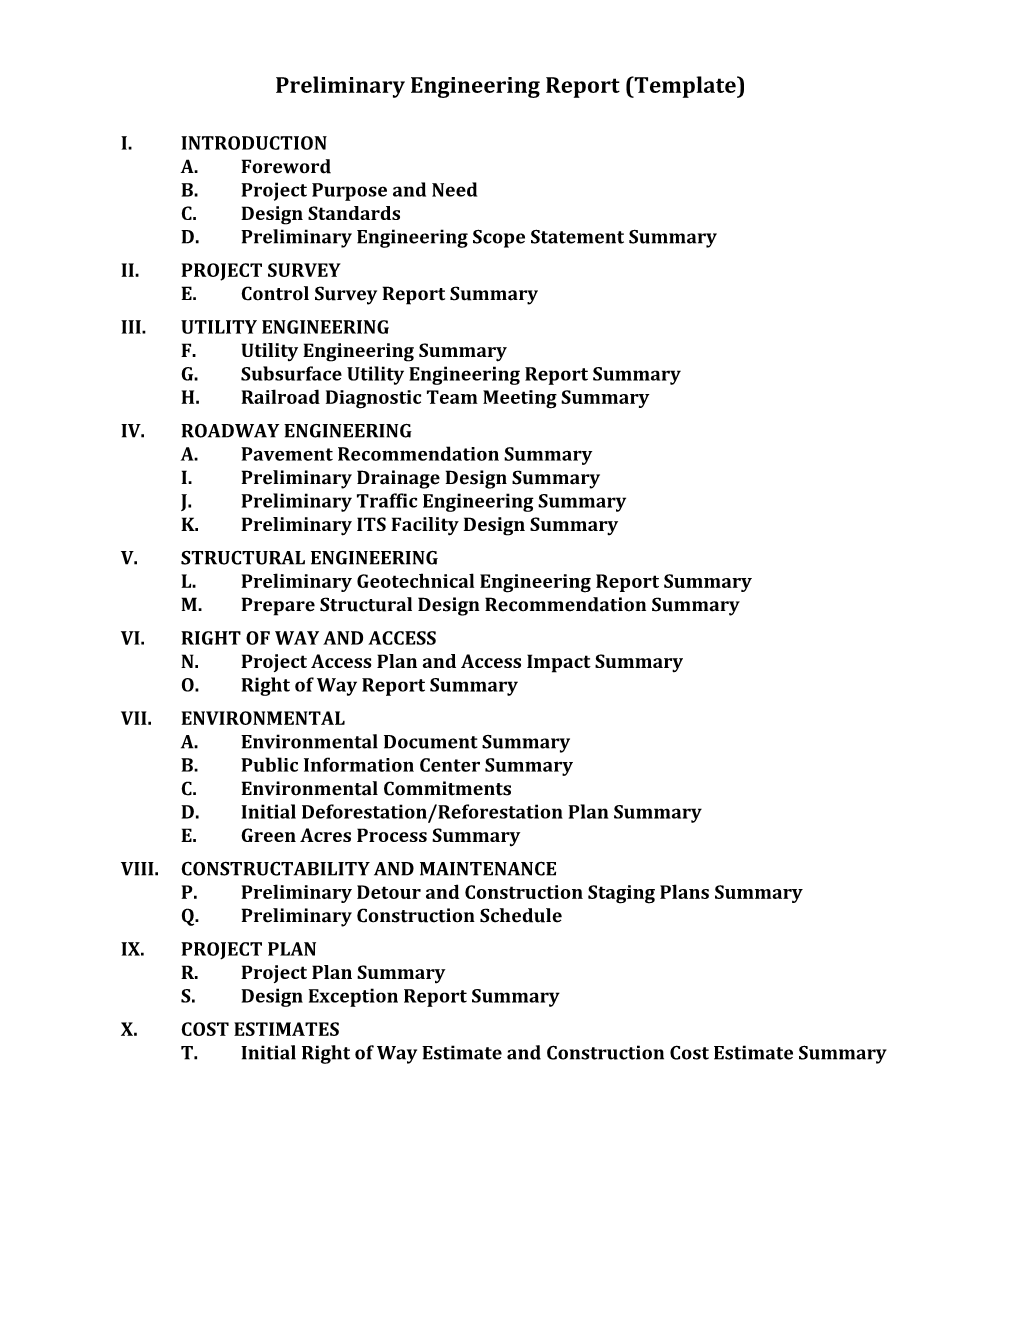 Preliminary Engineering Report Template